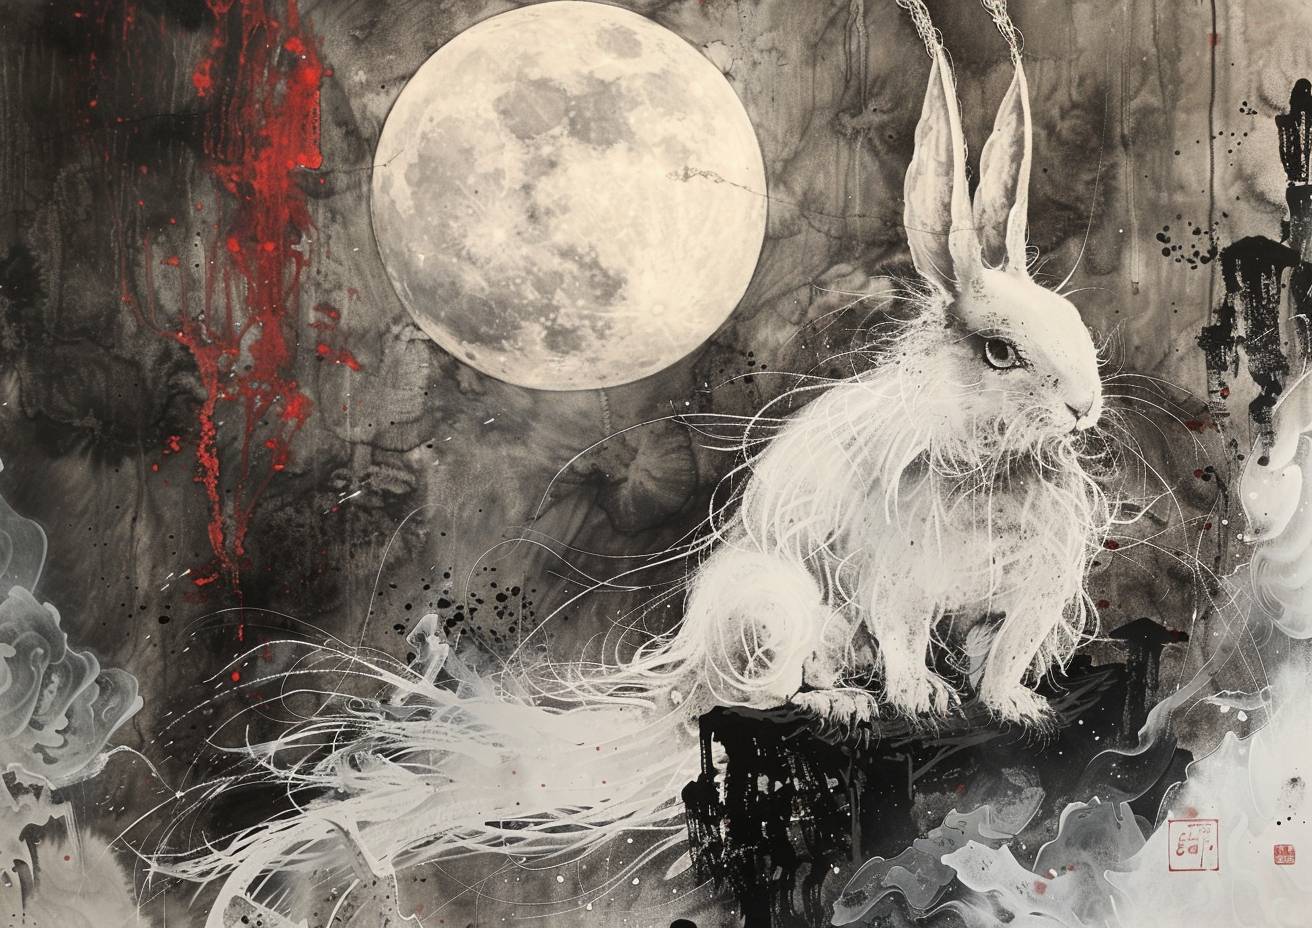 Traditional Chinese painting of Tu Shen, the rabbit god, in the lavish Rabbit Temple with a moon in the background. It features delicate strokes and a strong visual flow.